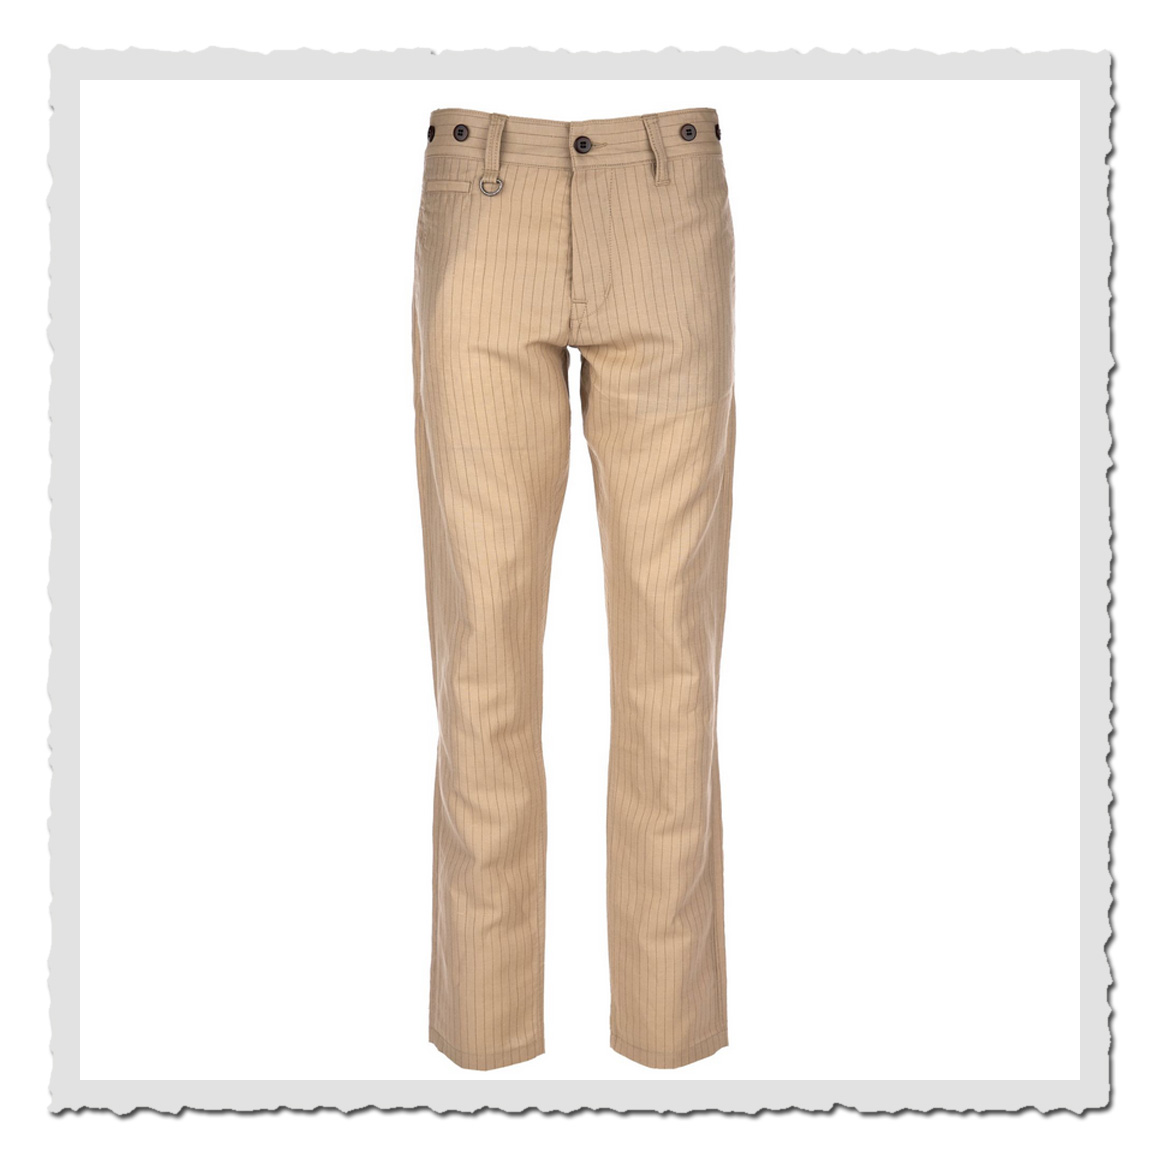 1947 Harvester Trousers Chicago sand